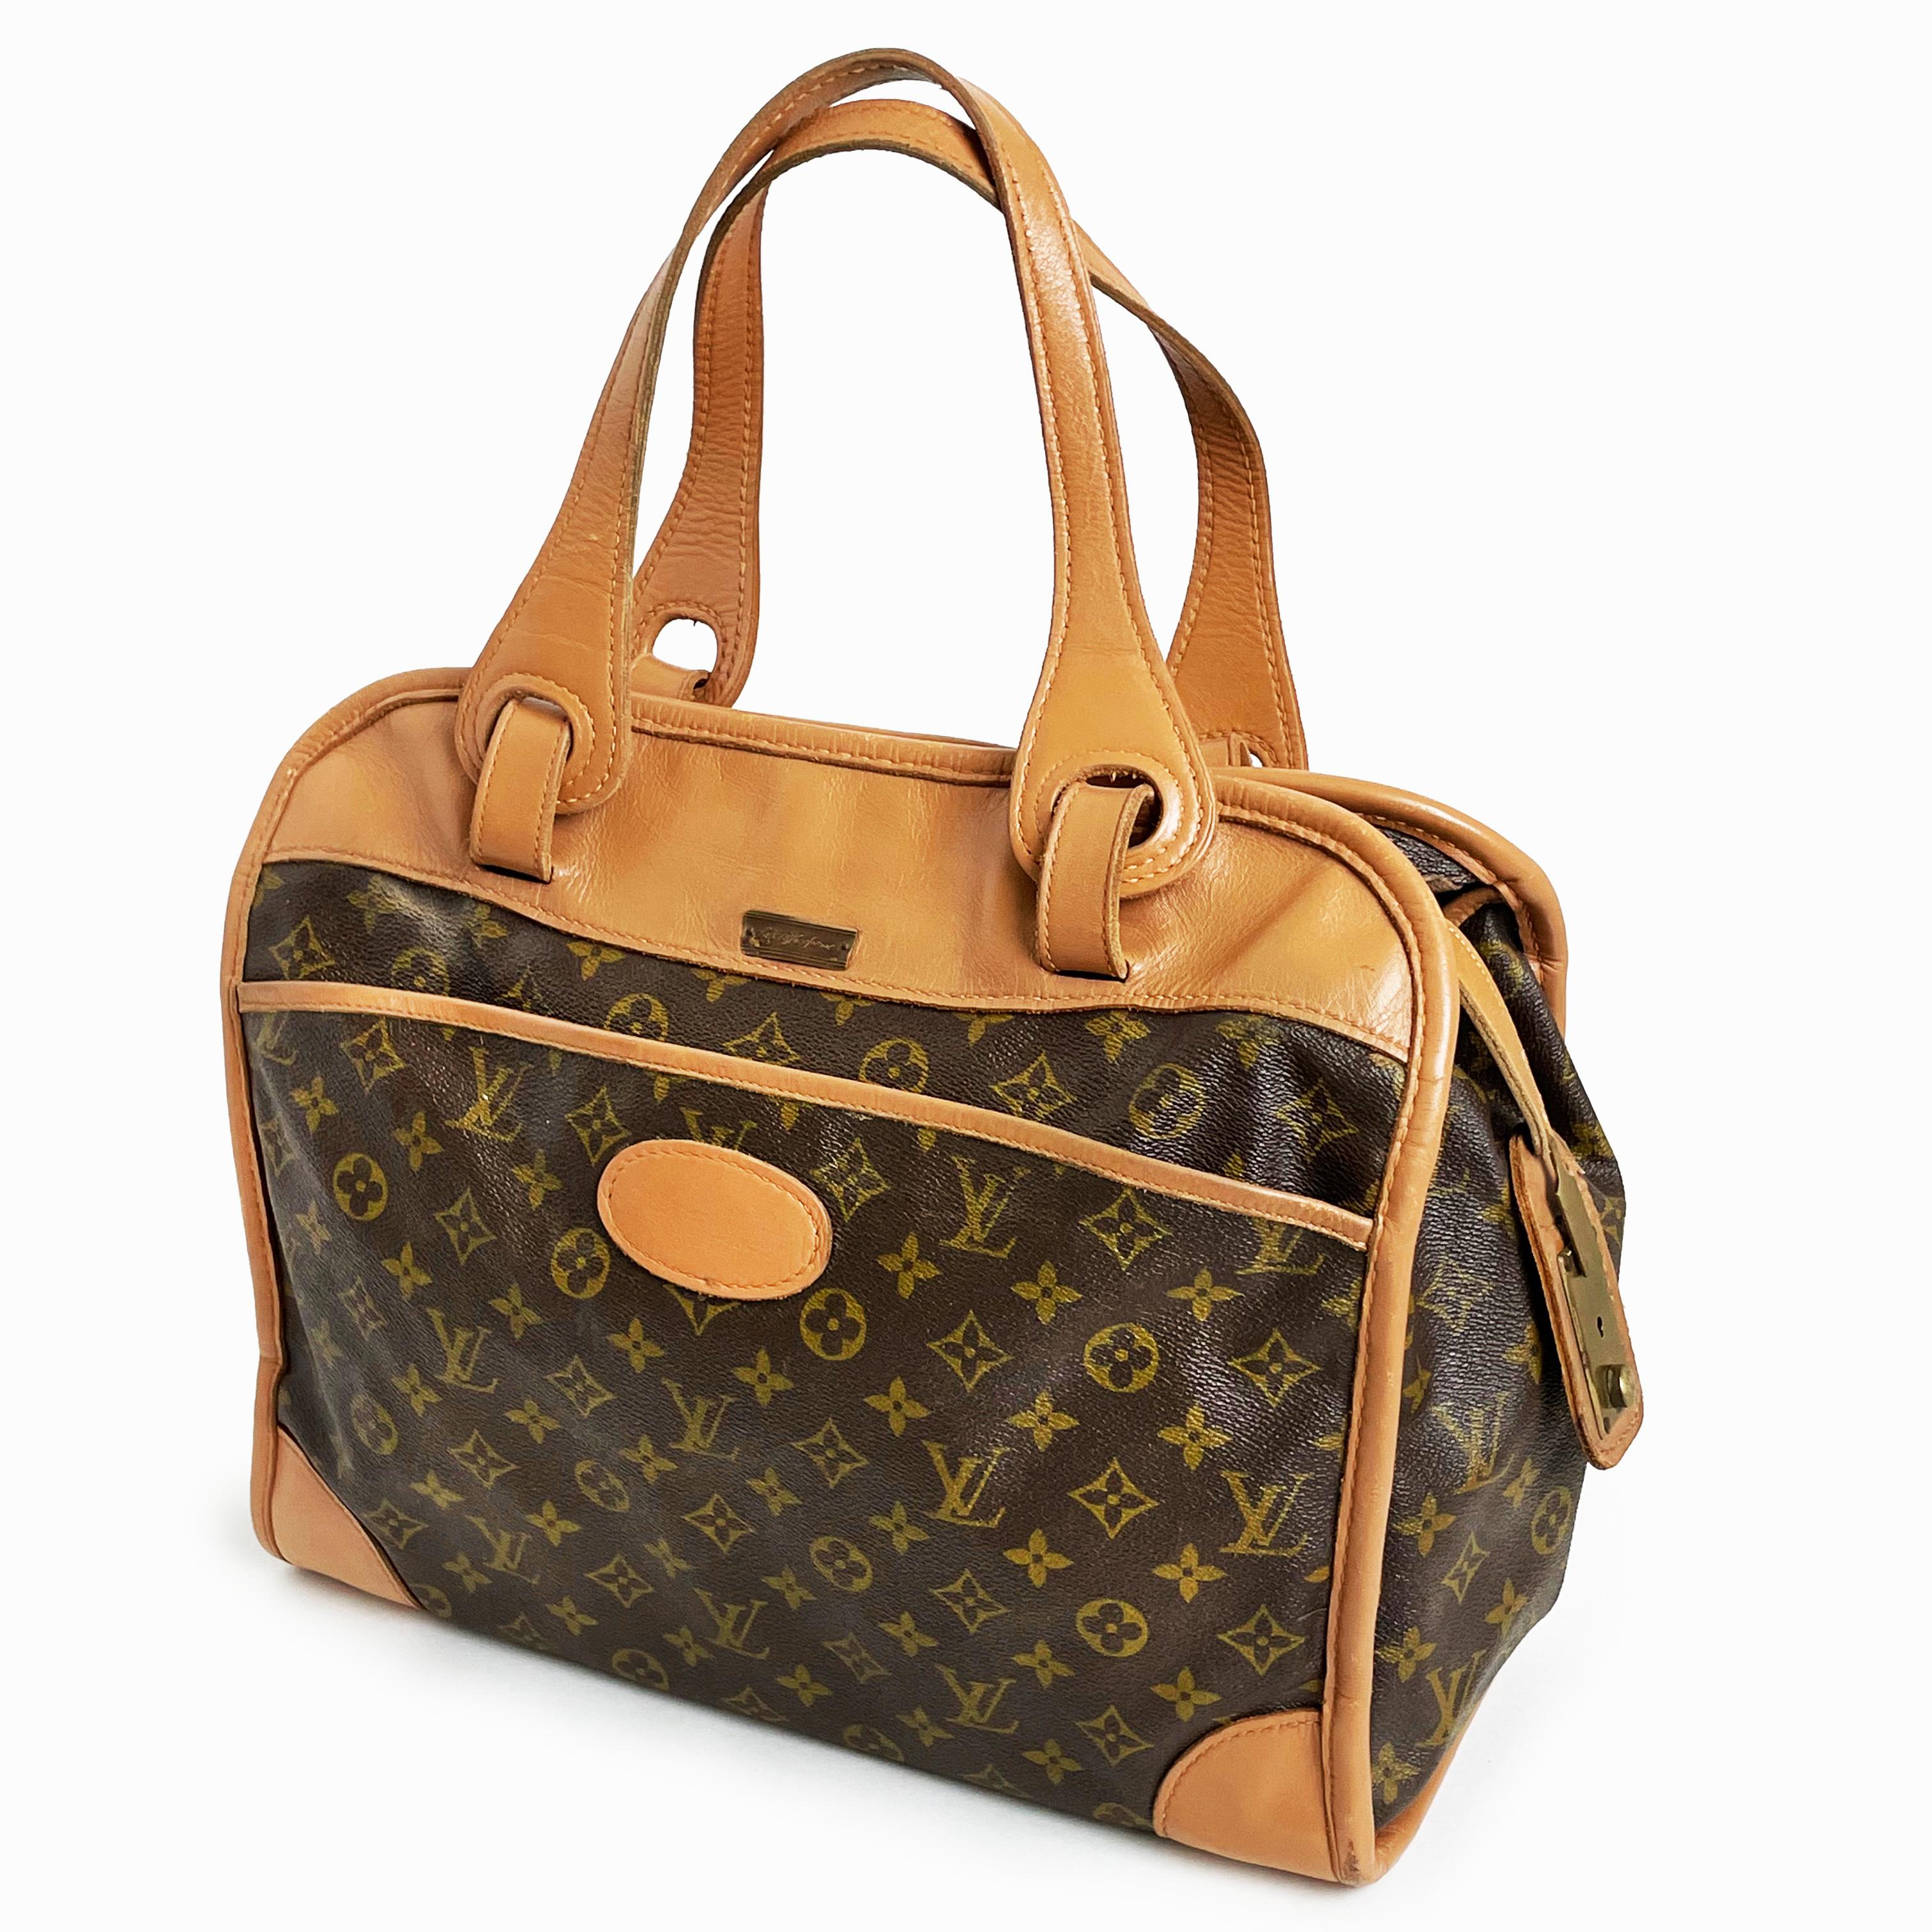 Louis Vuitton Tote Bag Travel Carry On French Luggage Co Saks 5th Ave Vintage  im Angebot 2